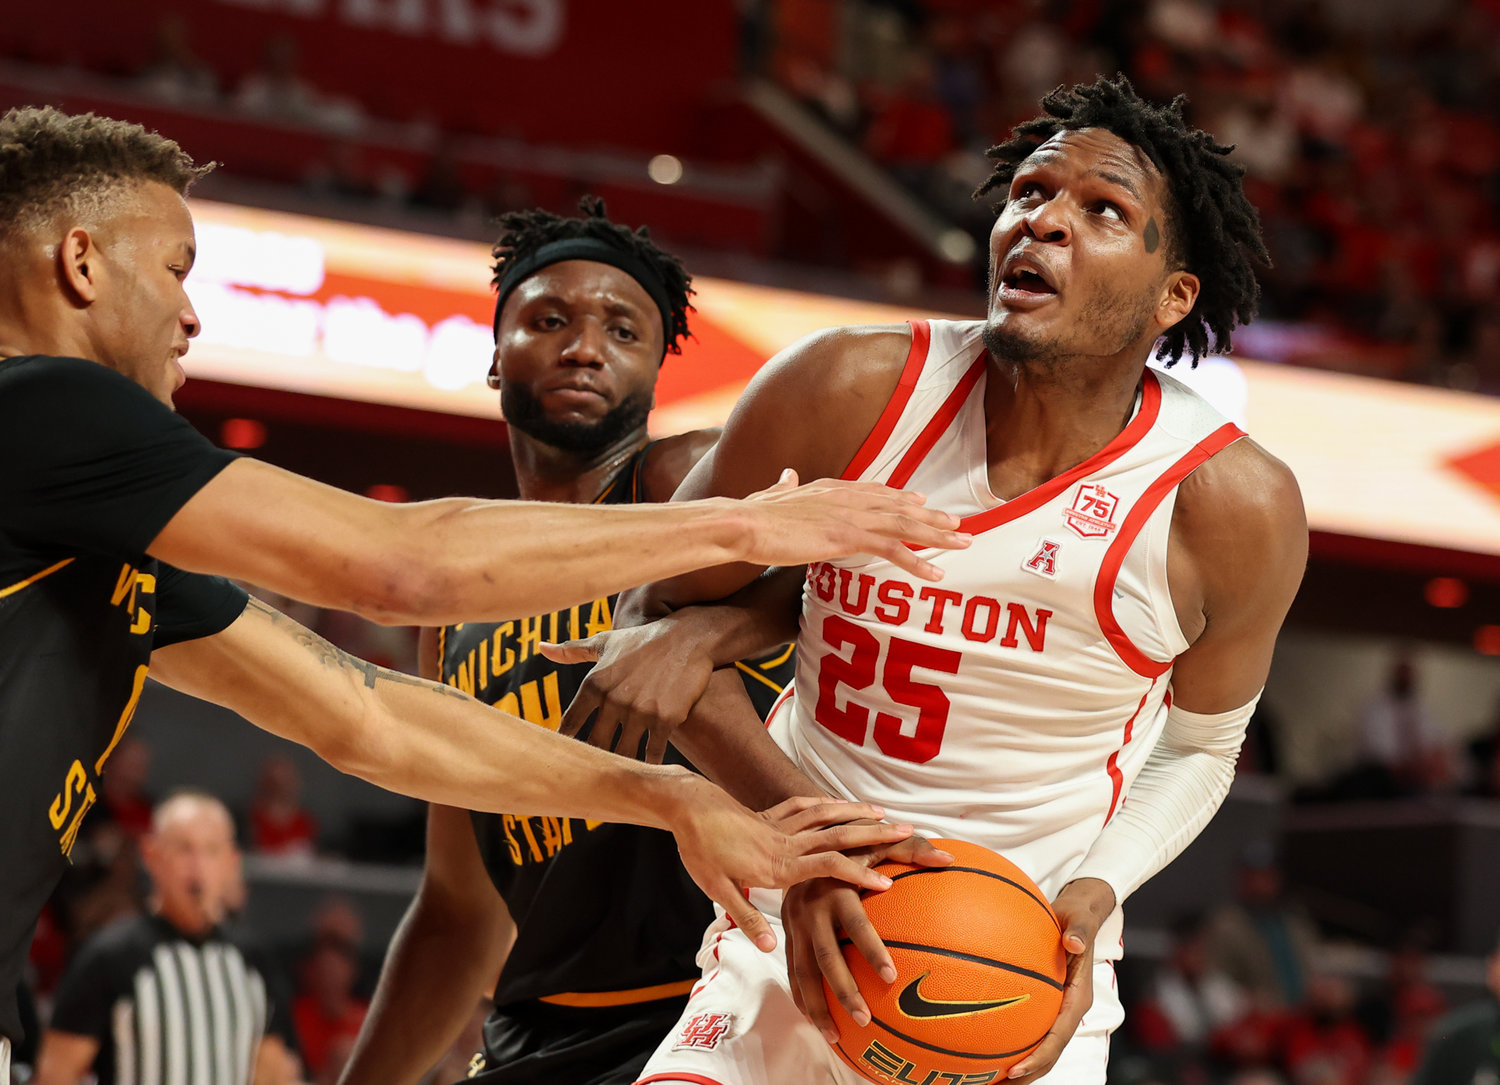 Houston Cougars center Josh Carlton (25) is fouled under the basket during an NCAA men’s basketball game between Houston and Wichita State on Jan. 8, 2022 in Houston, Texas.